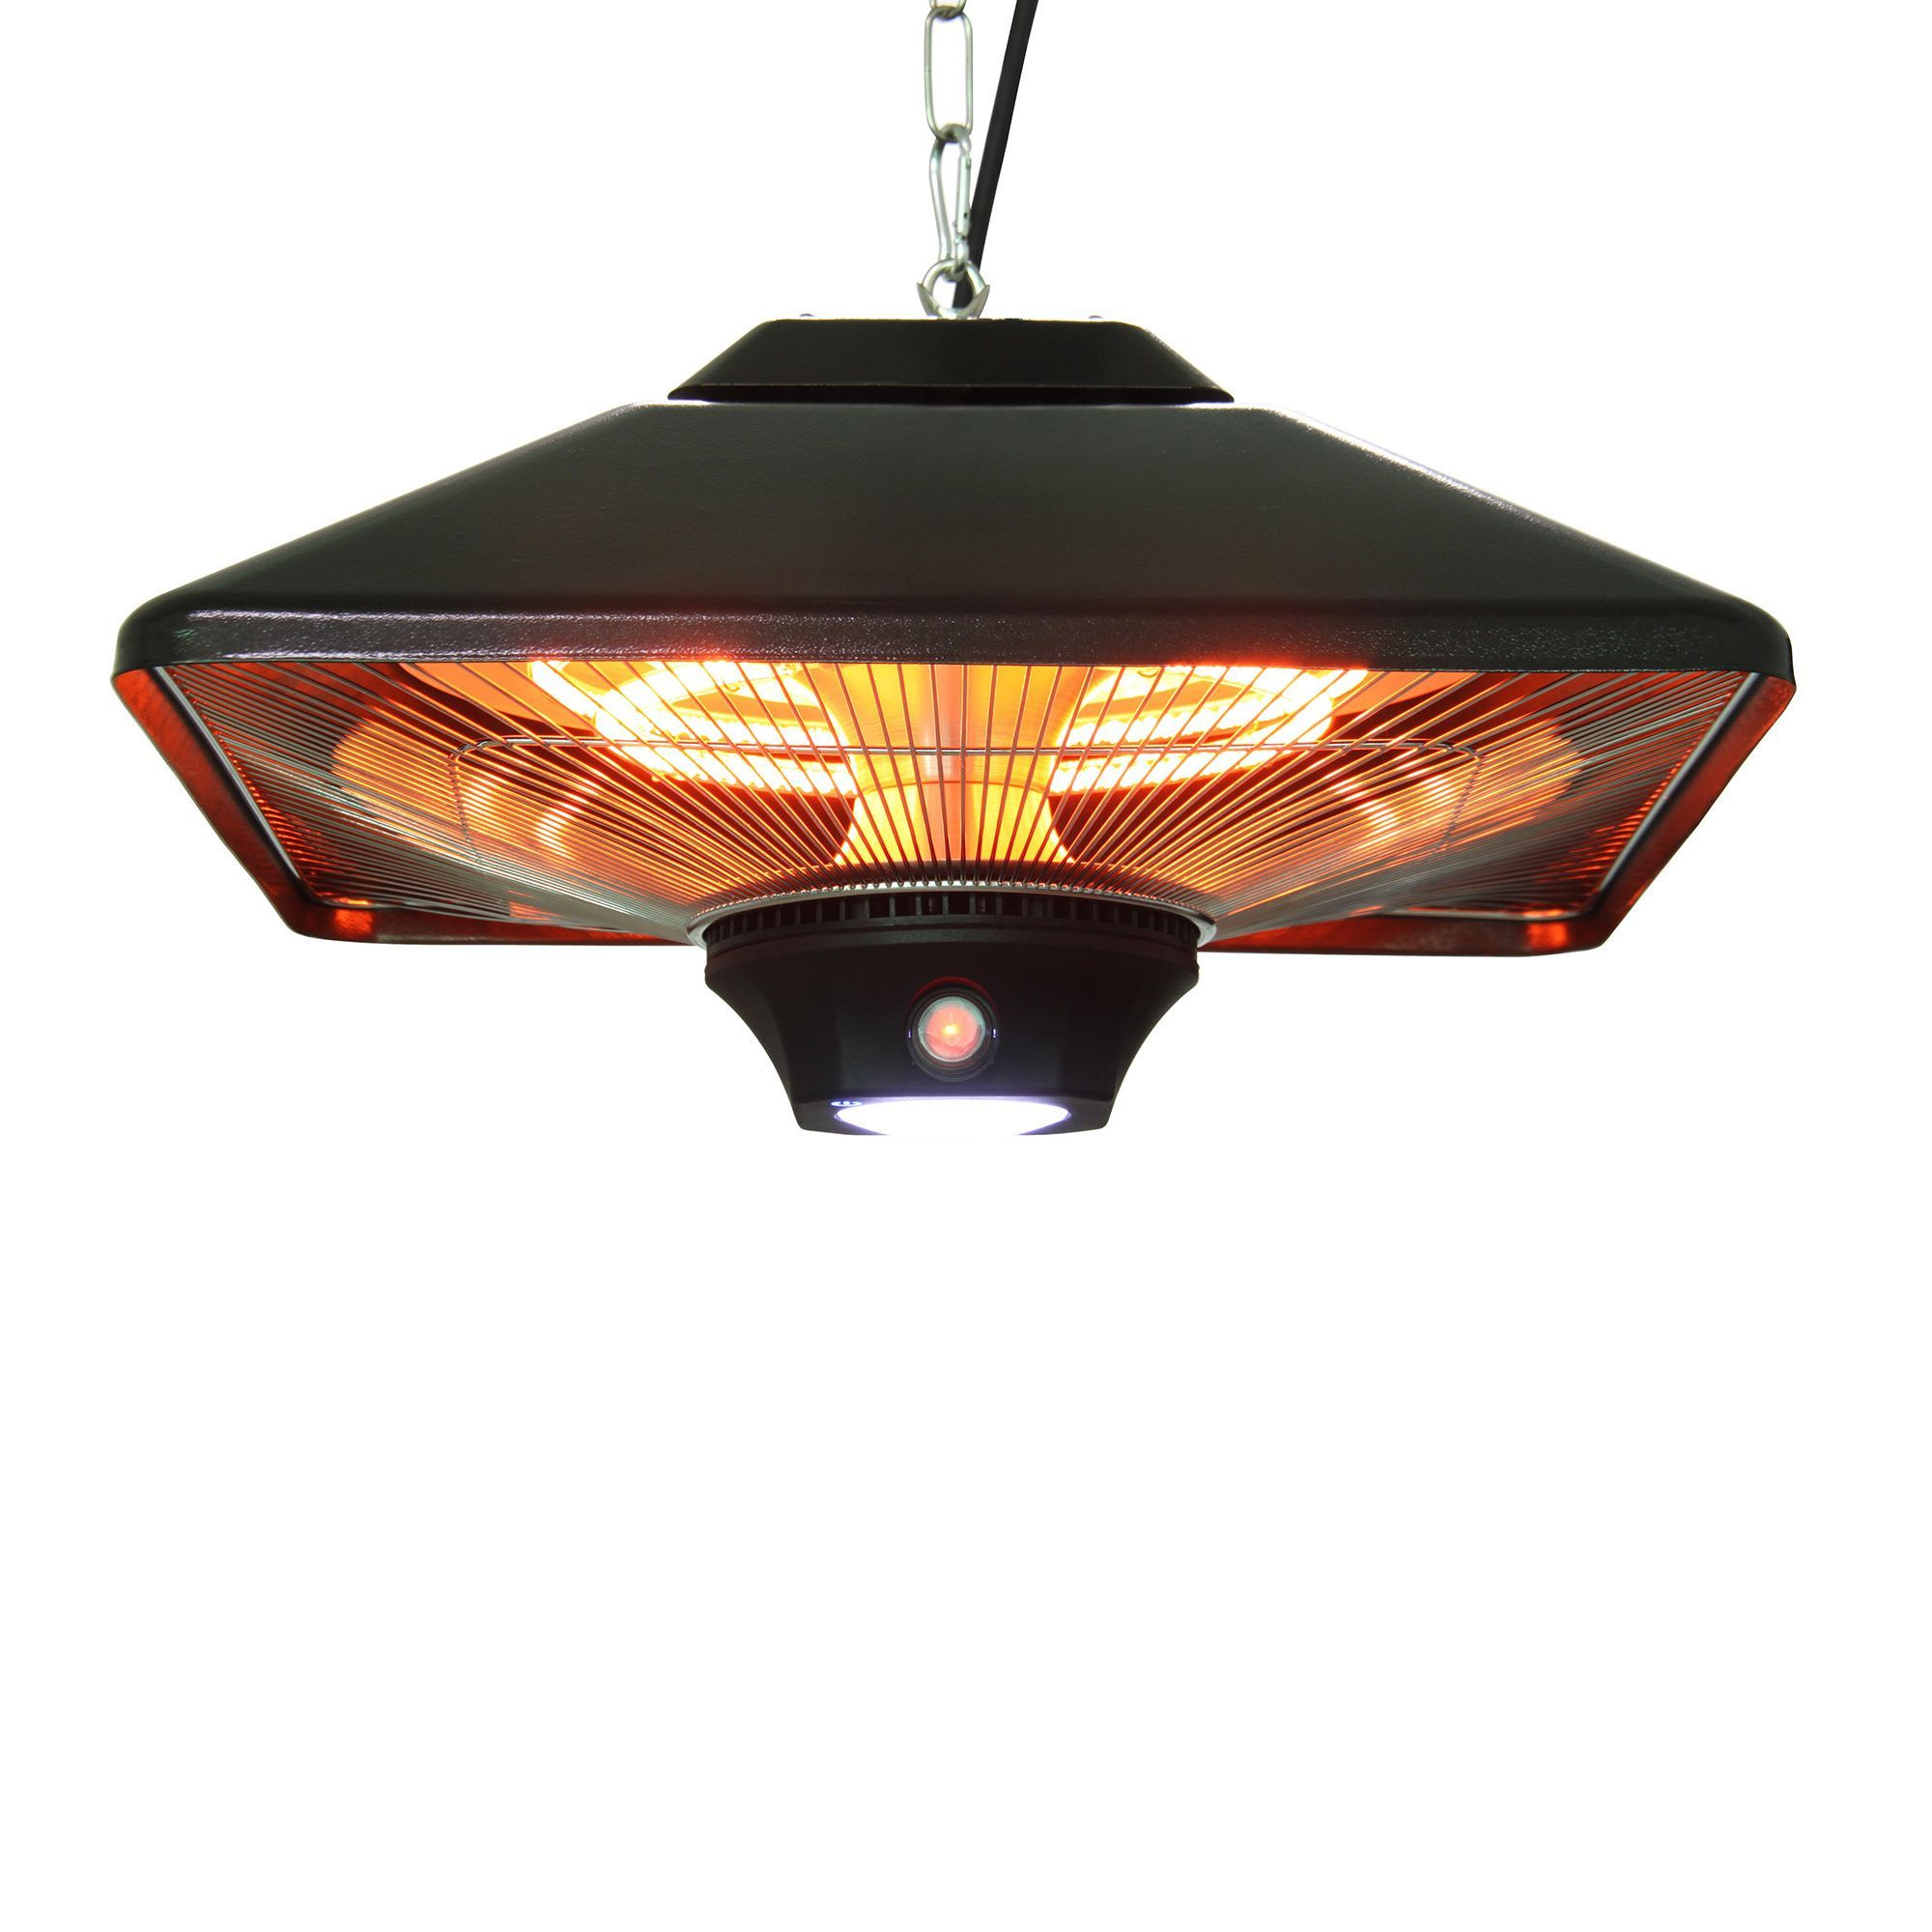 Energ Hea 2188led B Hanging Electric Infrared Outdoor in dimensions 2000 X 2000